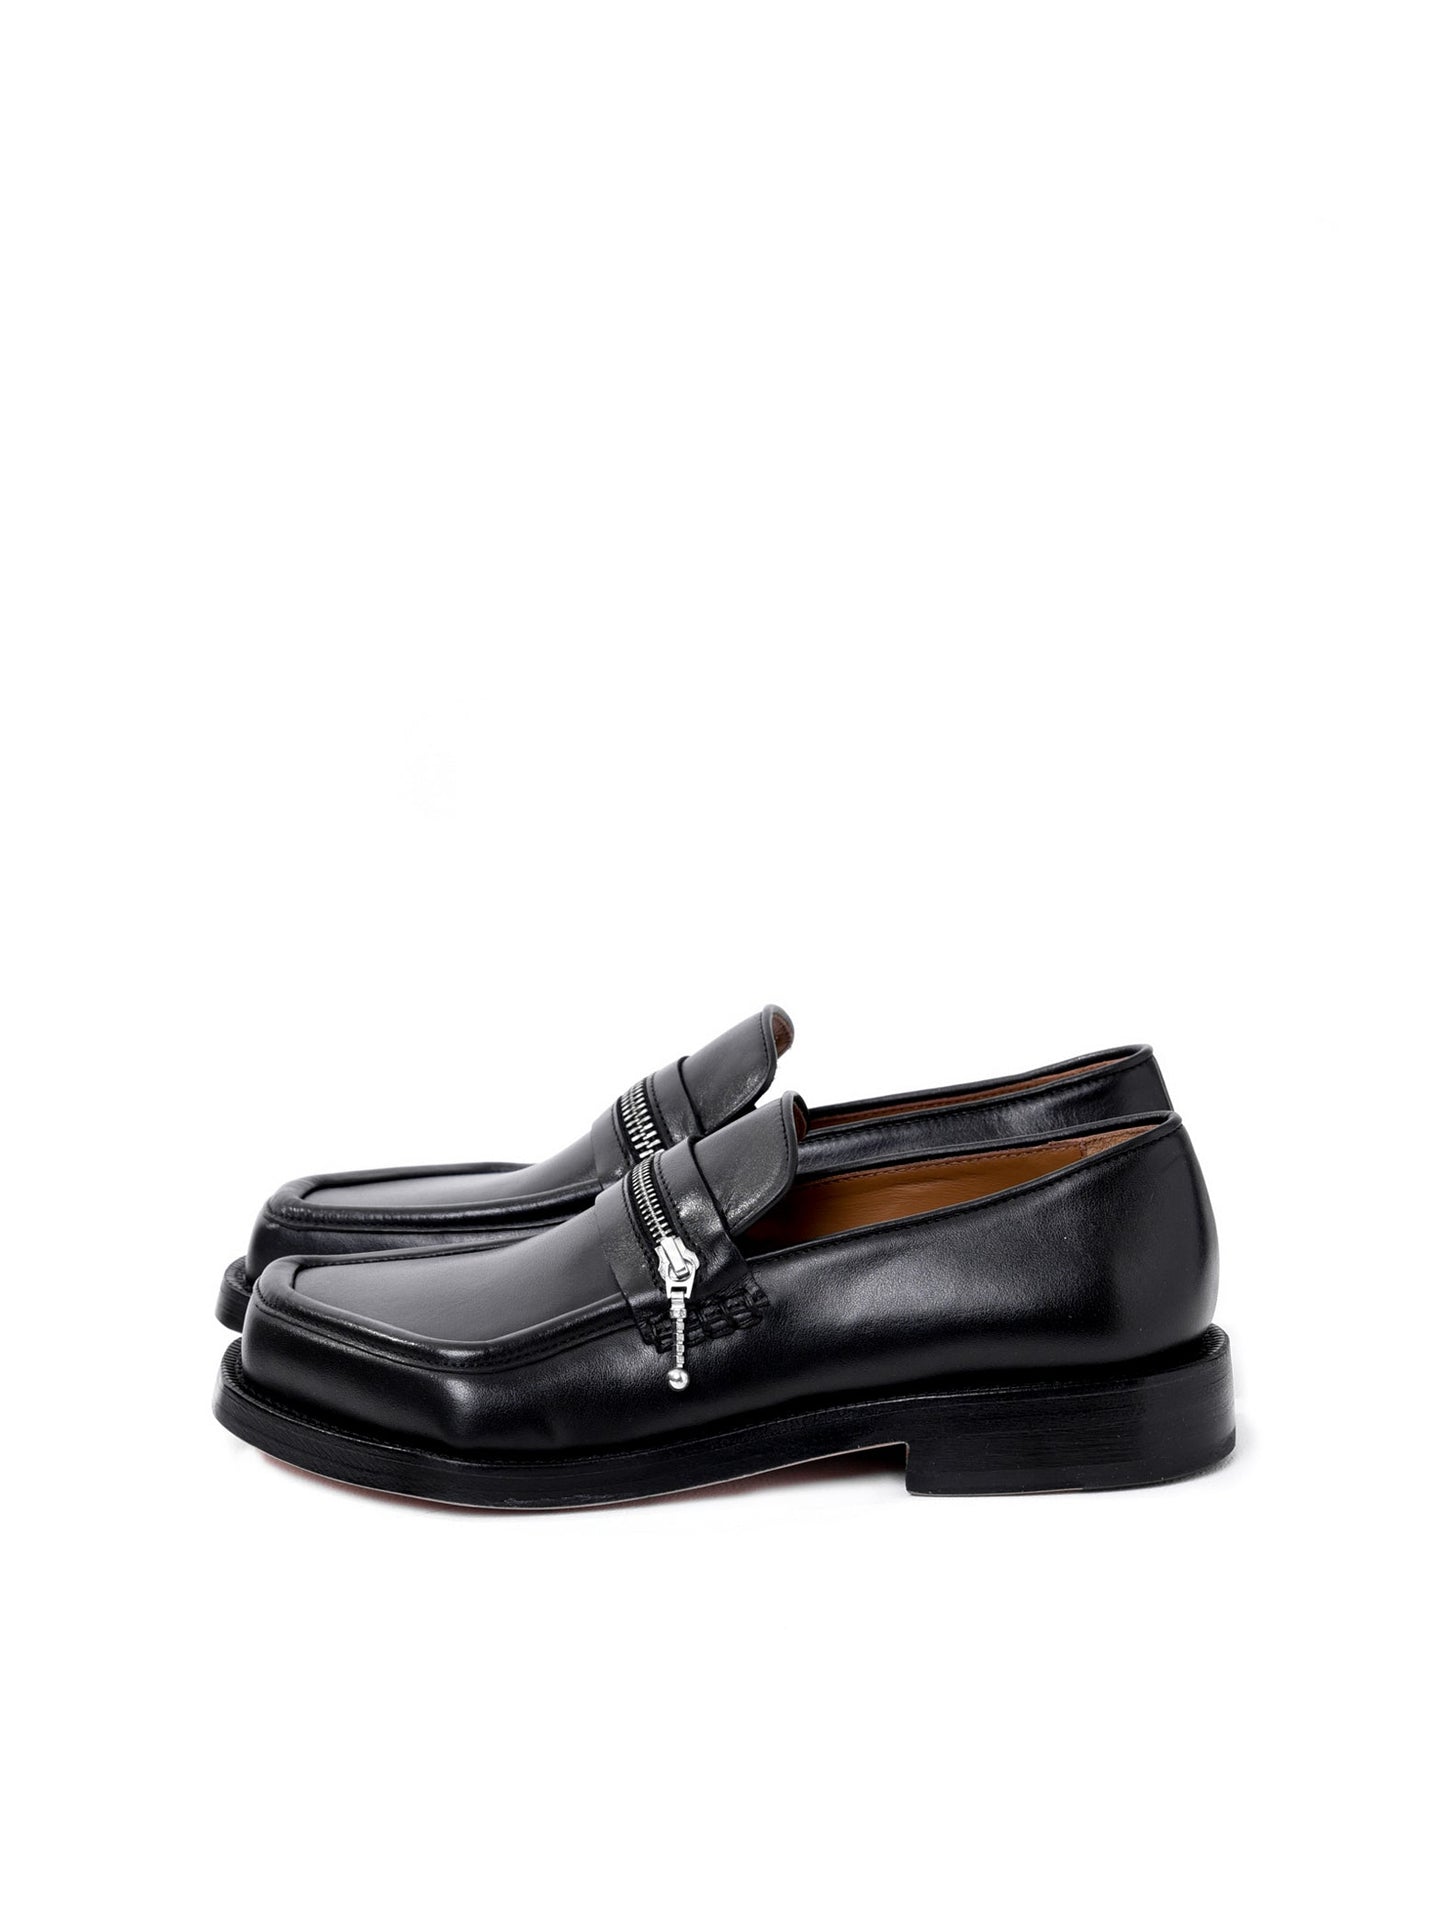 Magliano Black Classic Monster Loafer